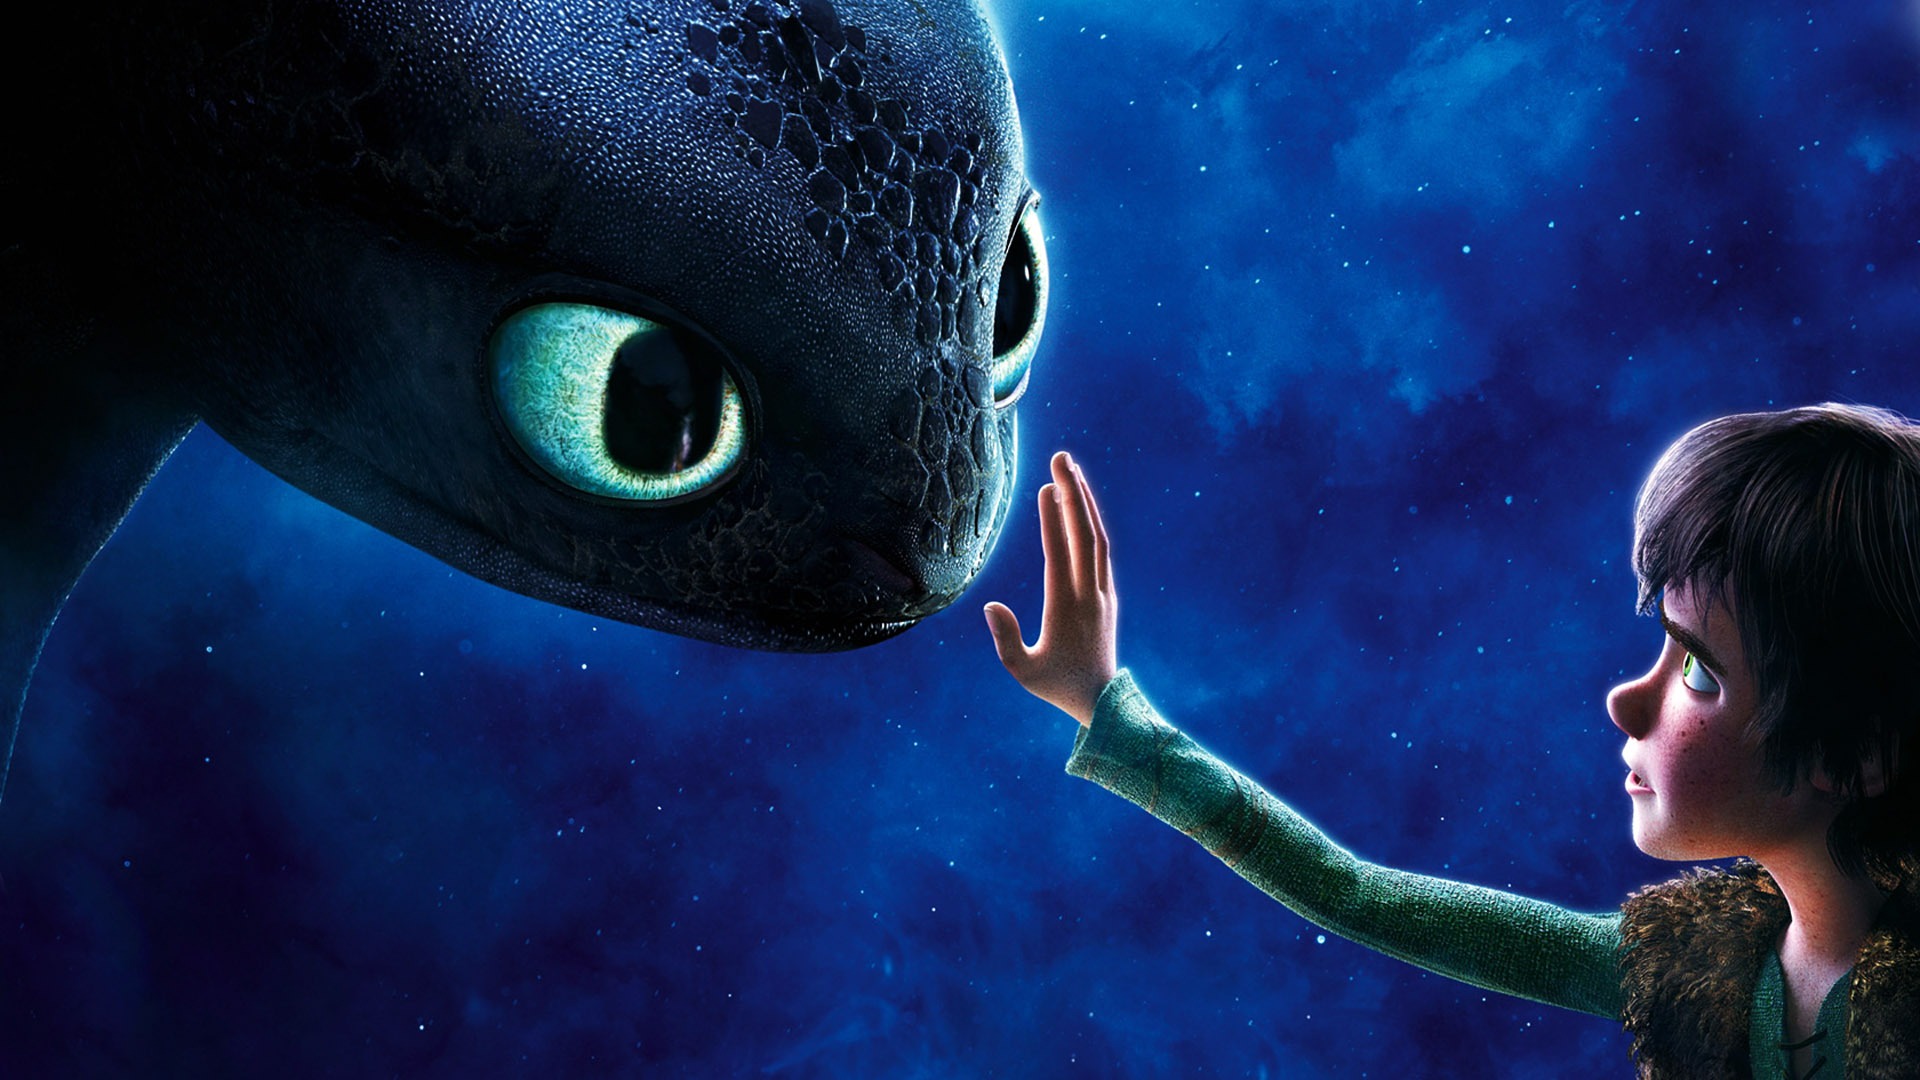 How to Train Your Dragon 驯龙高手 高清壁纸7 - 1920x1080